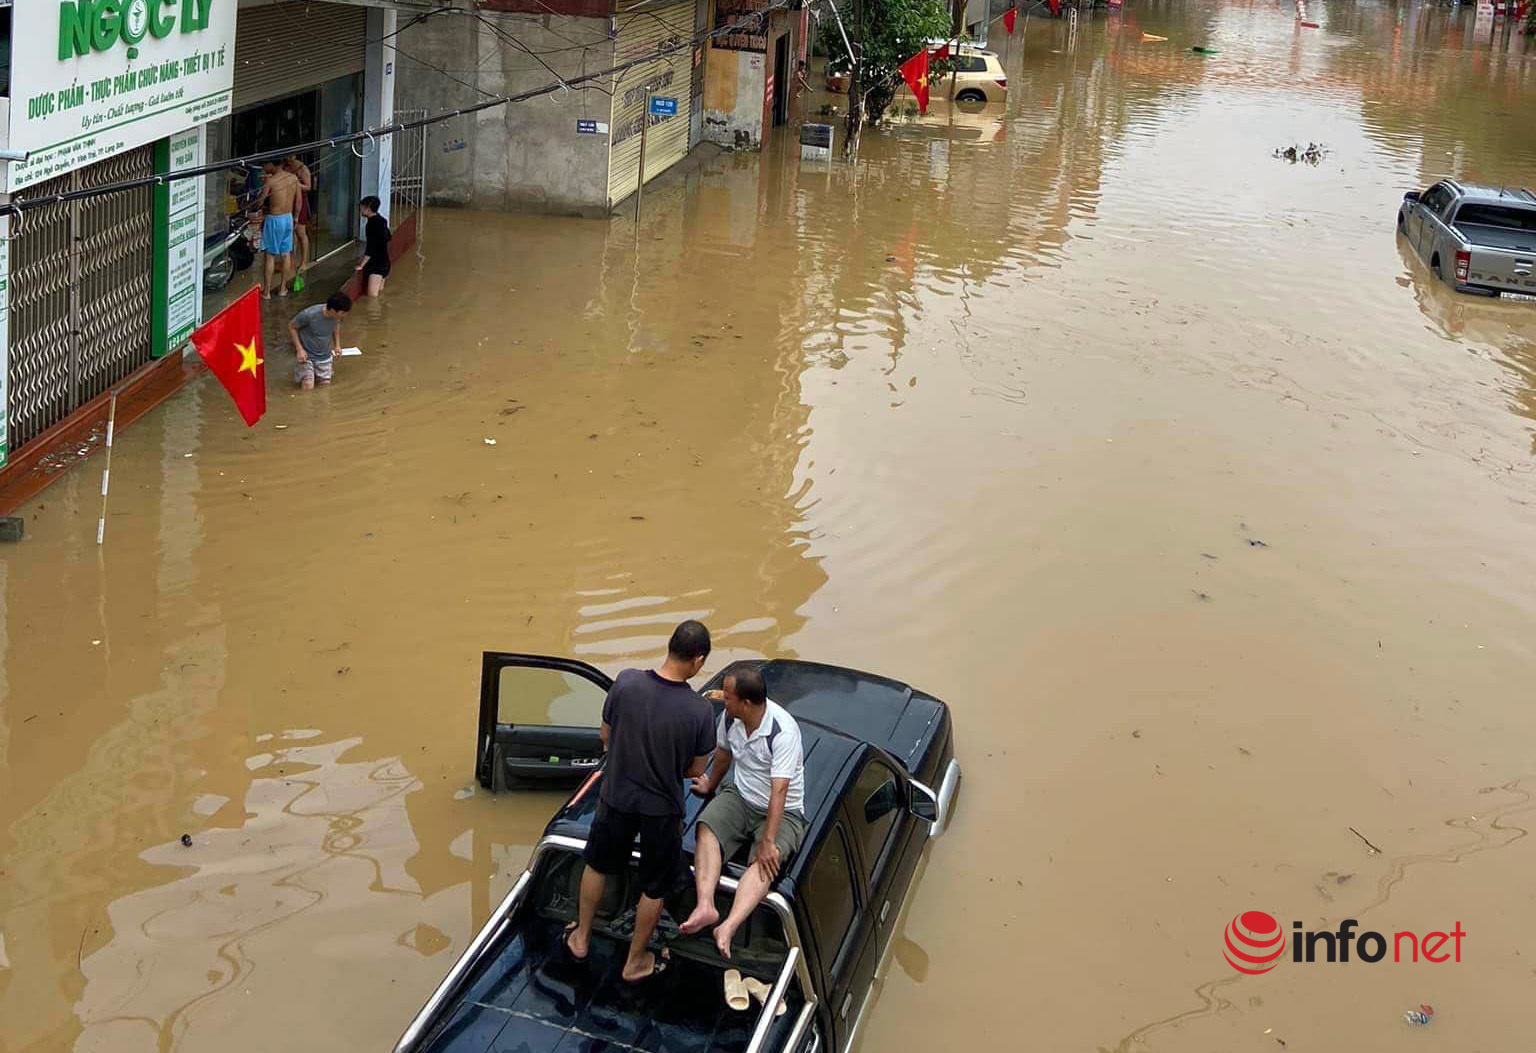 Lang Son: After heavy rain, many roads were flooded, 1 person died